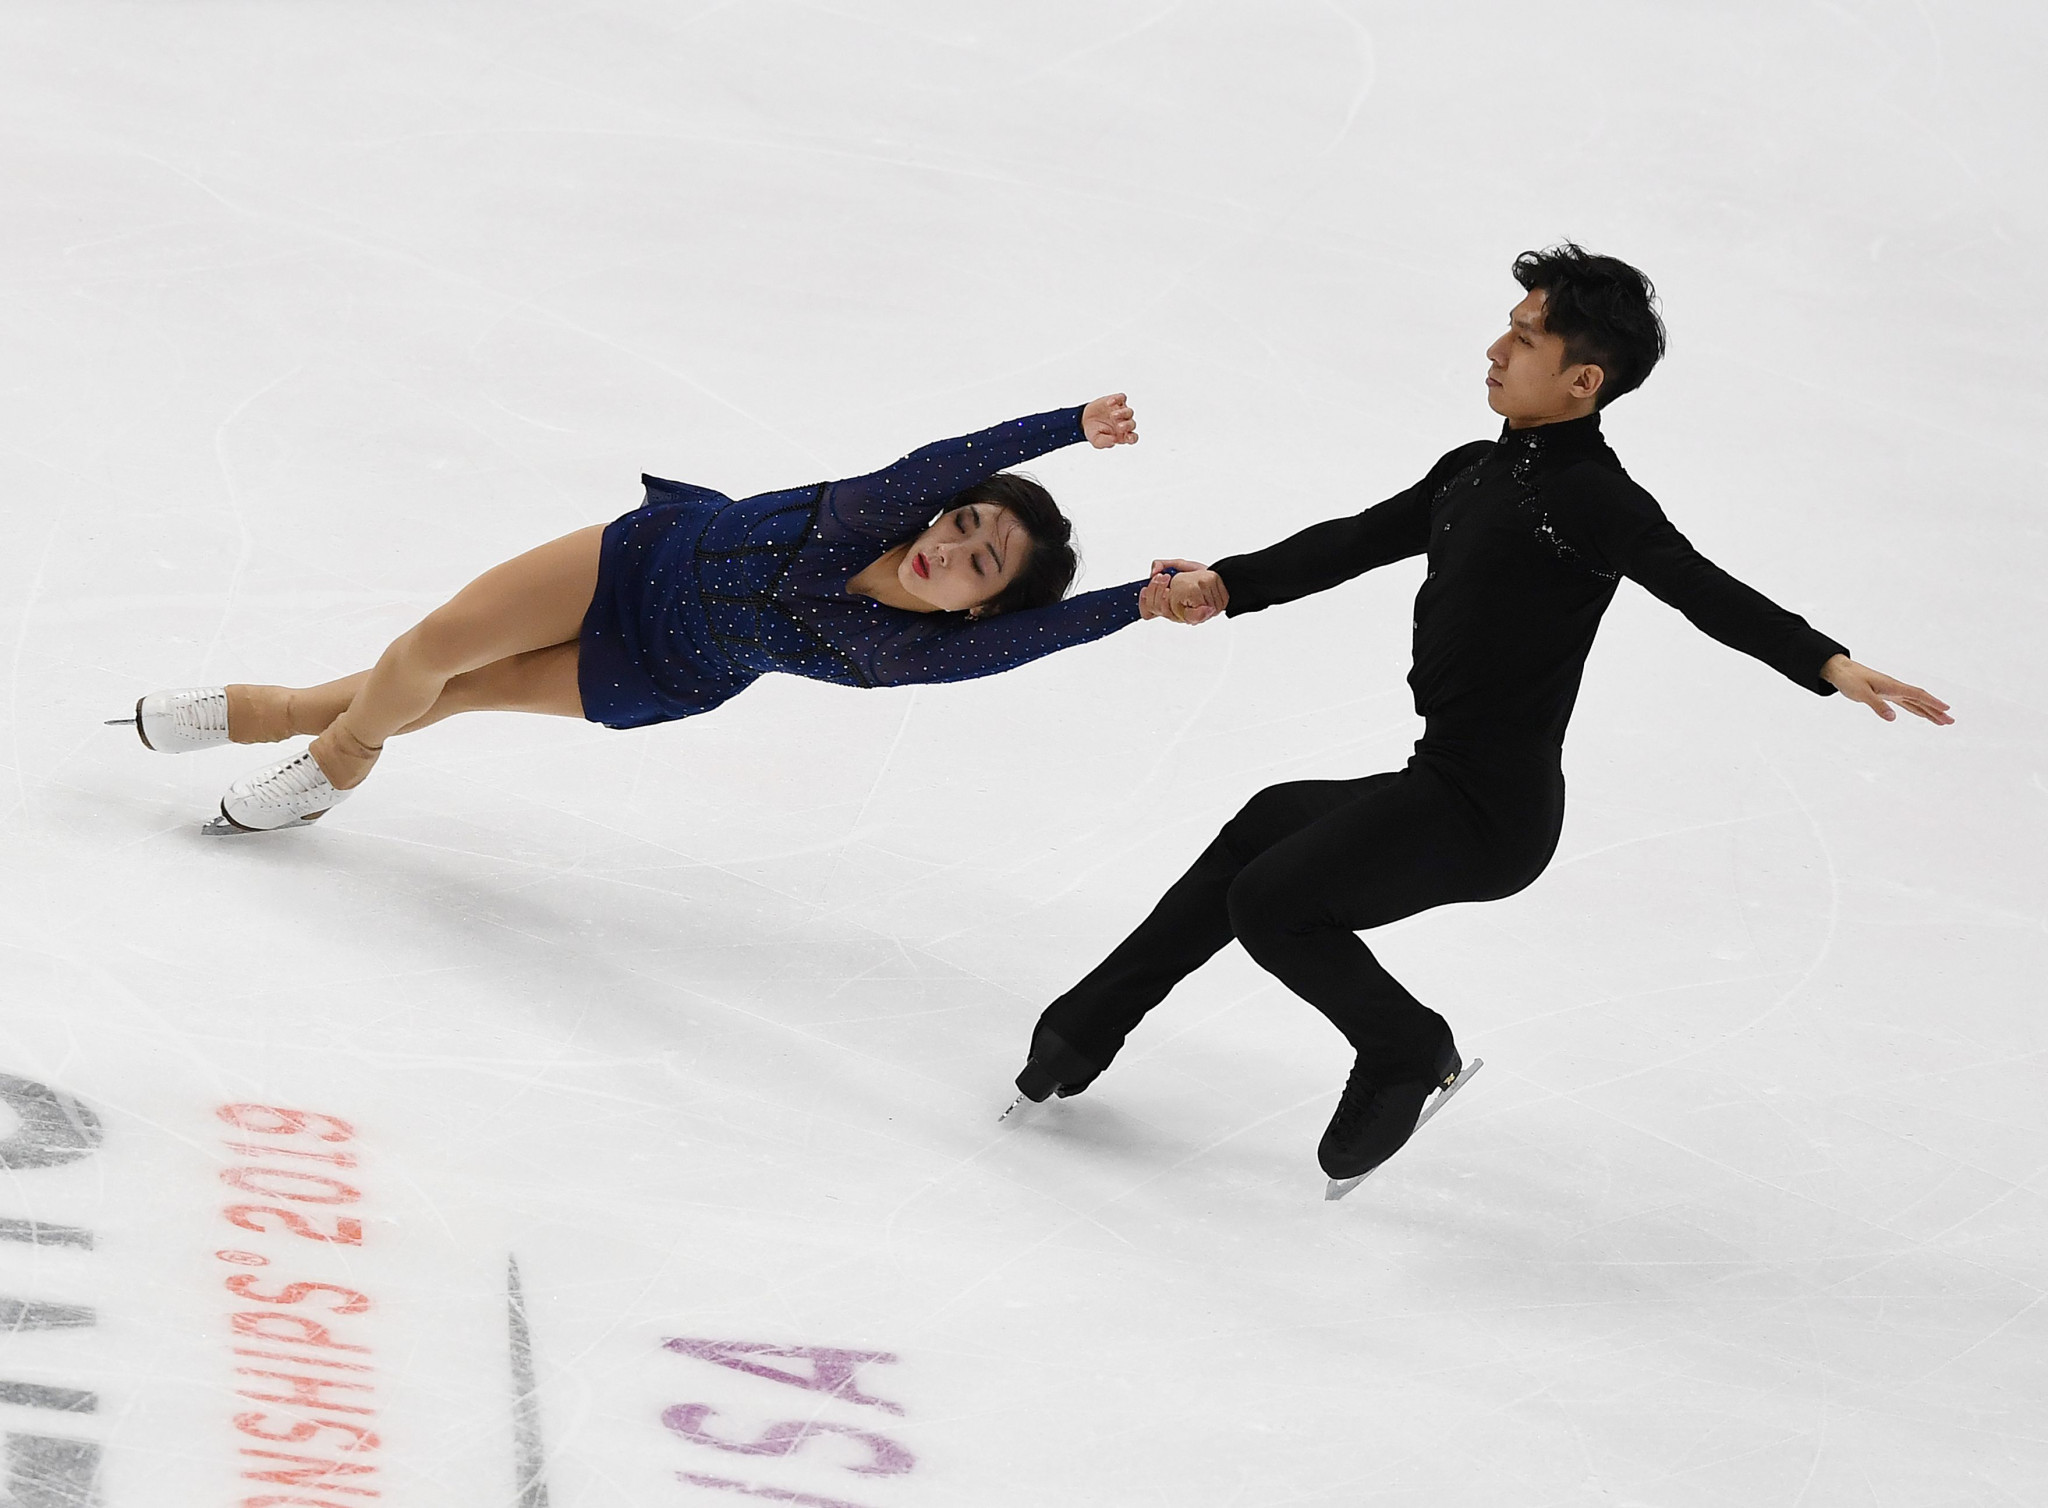 Wenjing Sui and Cong Han won the pairs competition for the fifth time in their career ©Getty Images